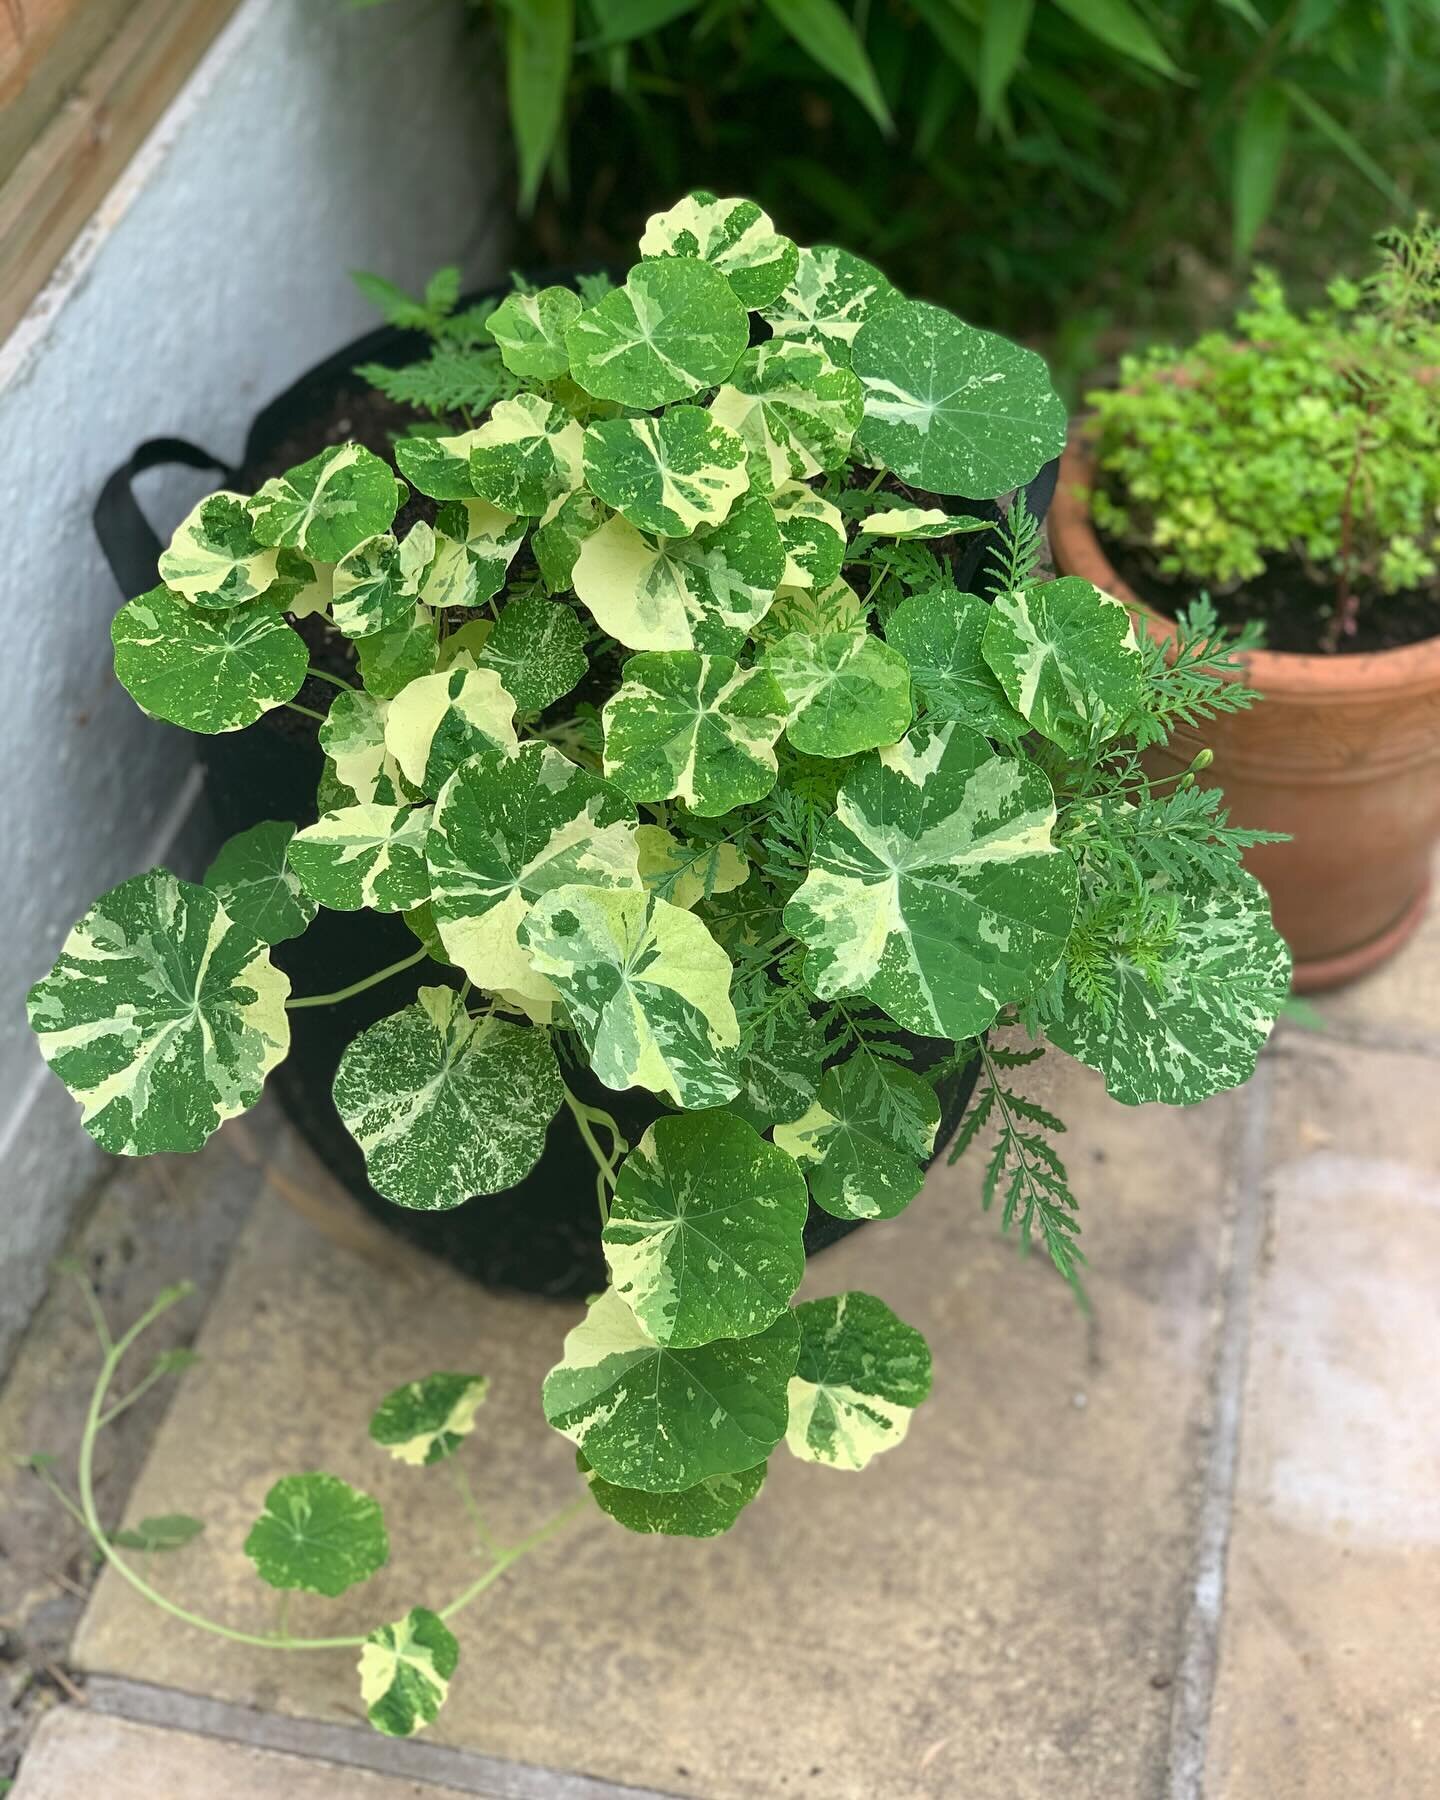 Doing a little garden planning for the year and realizing nasturtiums are one of my all time favorite things to grow. The best part being you can eat every bit of the plant, from seed to leaf to flower! They are also an amazing companion plant, attra